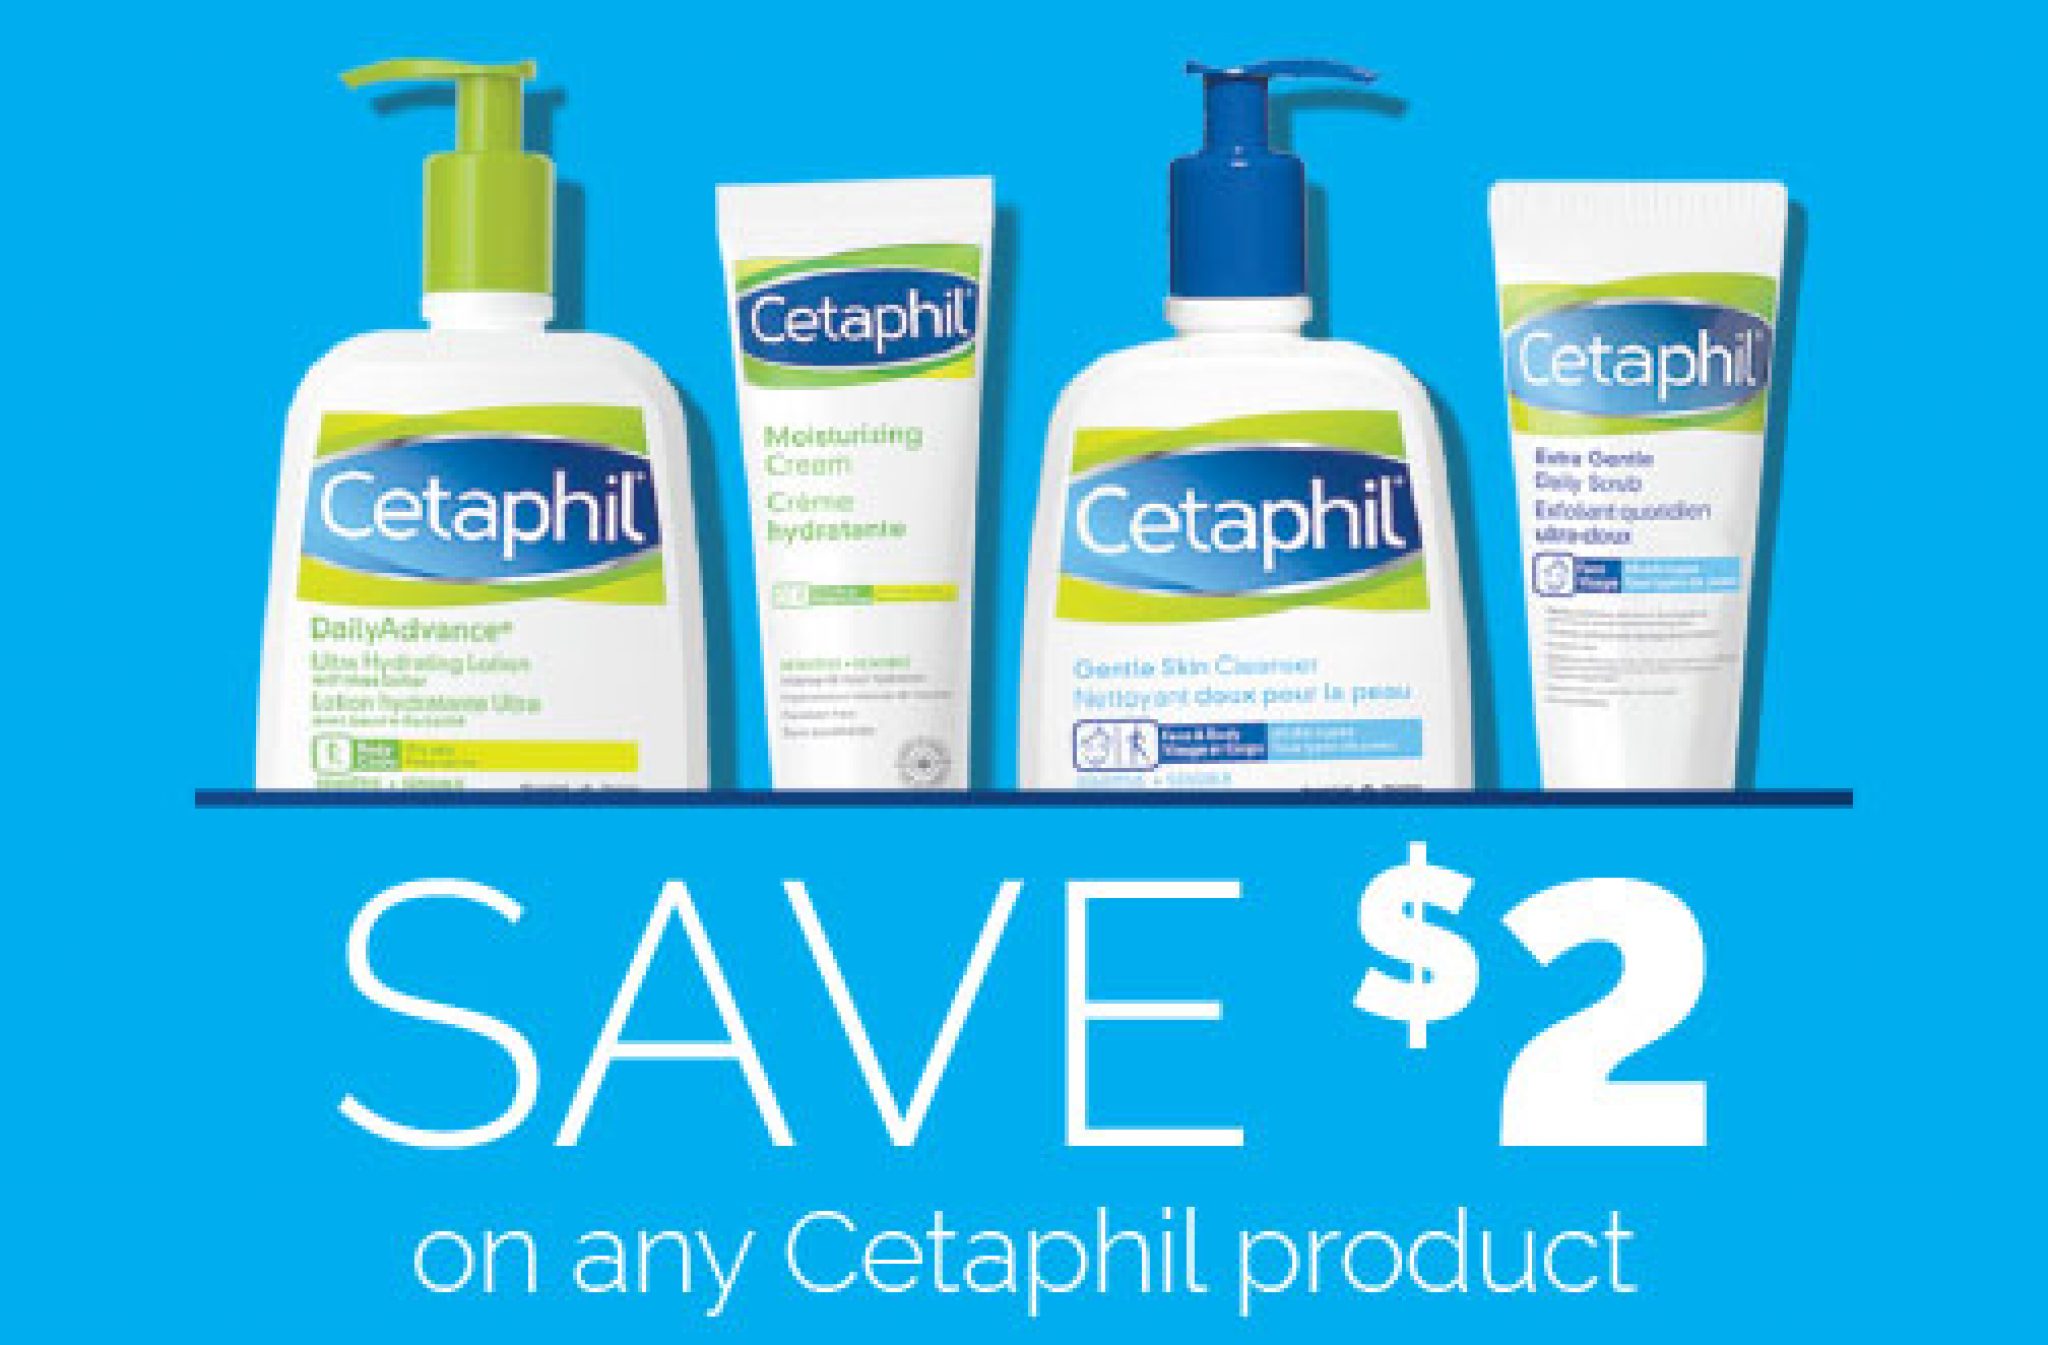 Cetaphil Coupons Canada Save 2 Off Cetaphil Products — Deals from